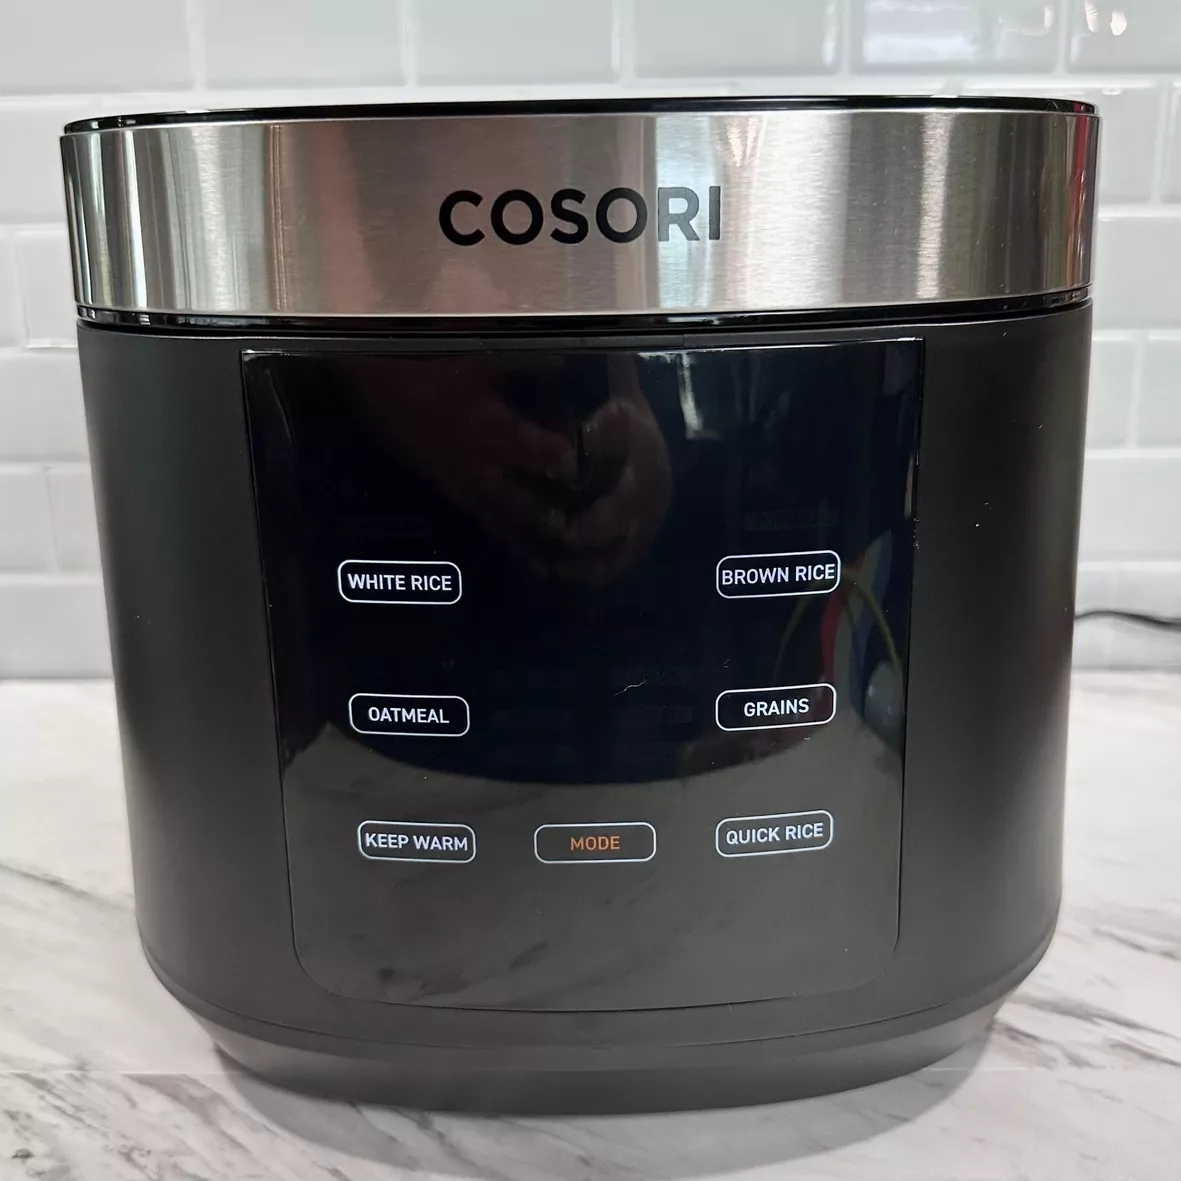 Cosori Rice Cooker Large Maker 18 Functions Japanese Style Fuzzy Logic Micom